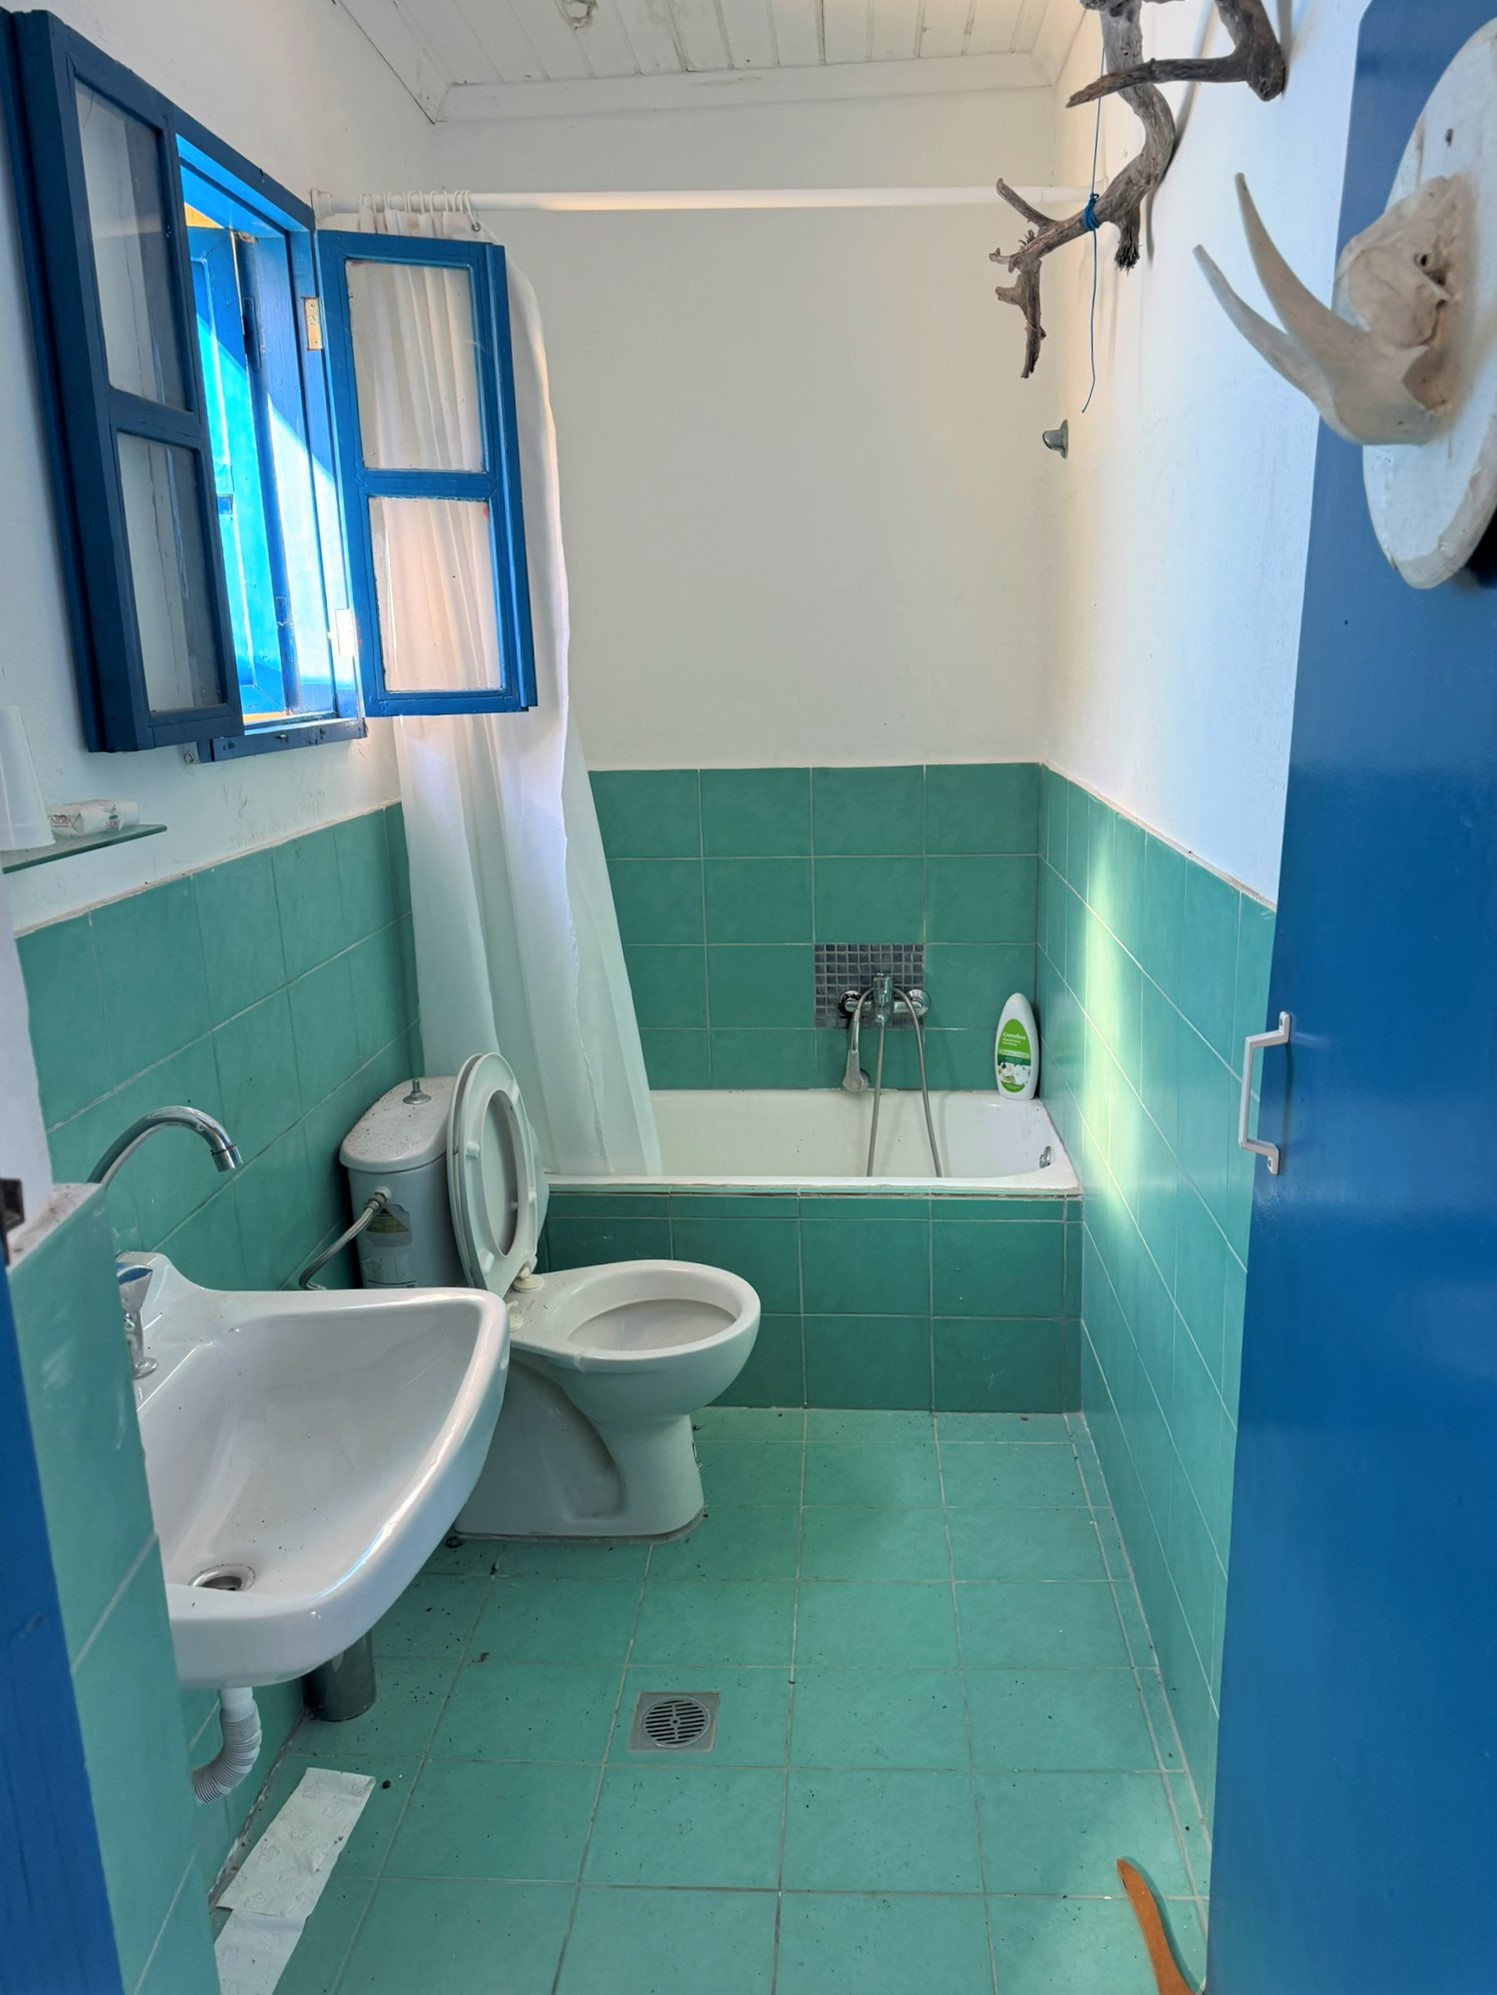 Bathroom of house for sale in Ithaca Greece, Vathi